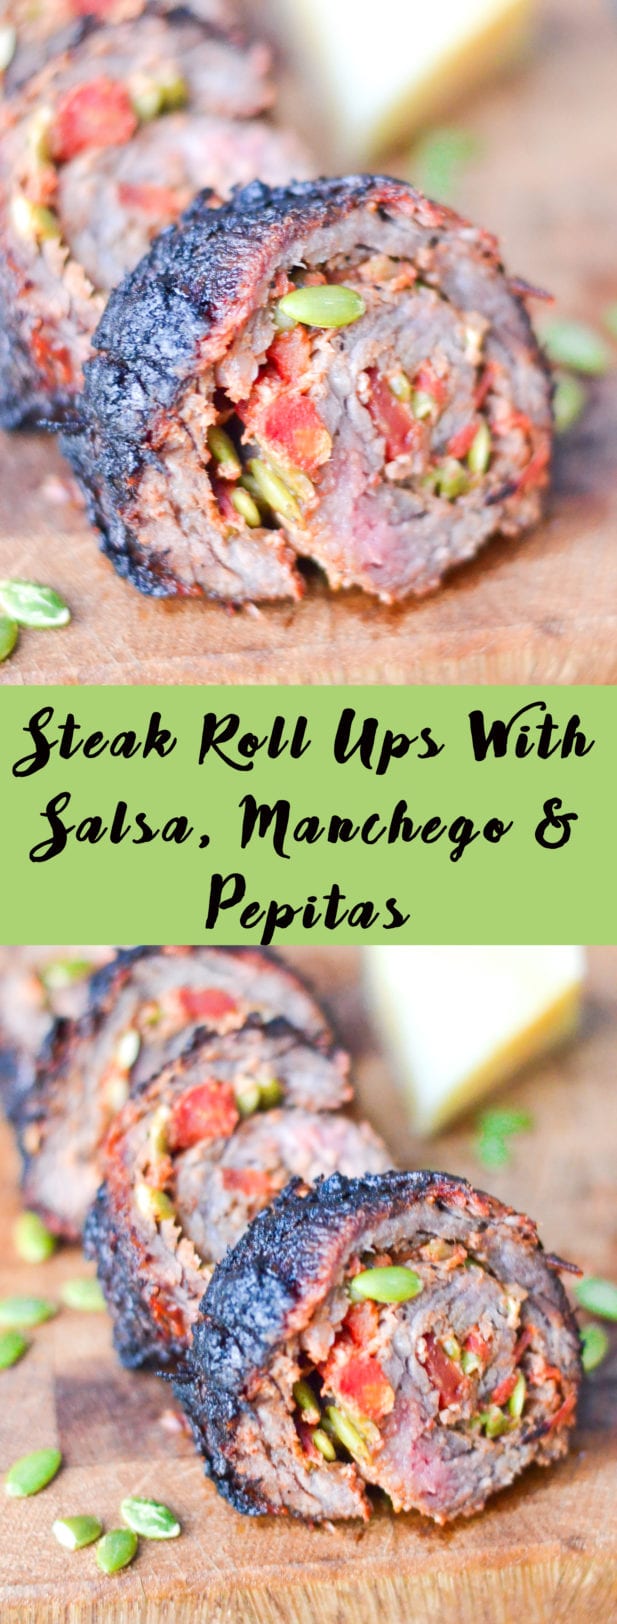 Steak Roll-ups With Salsa Casera, Manchego and Pepitas